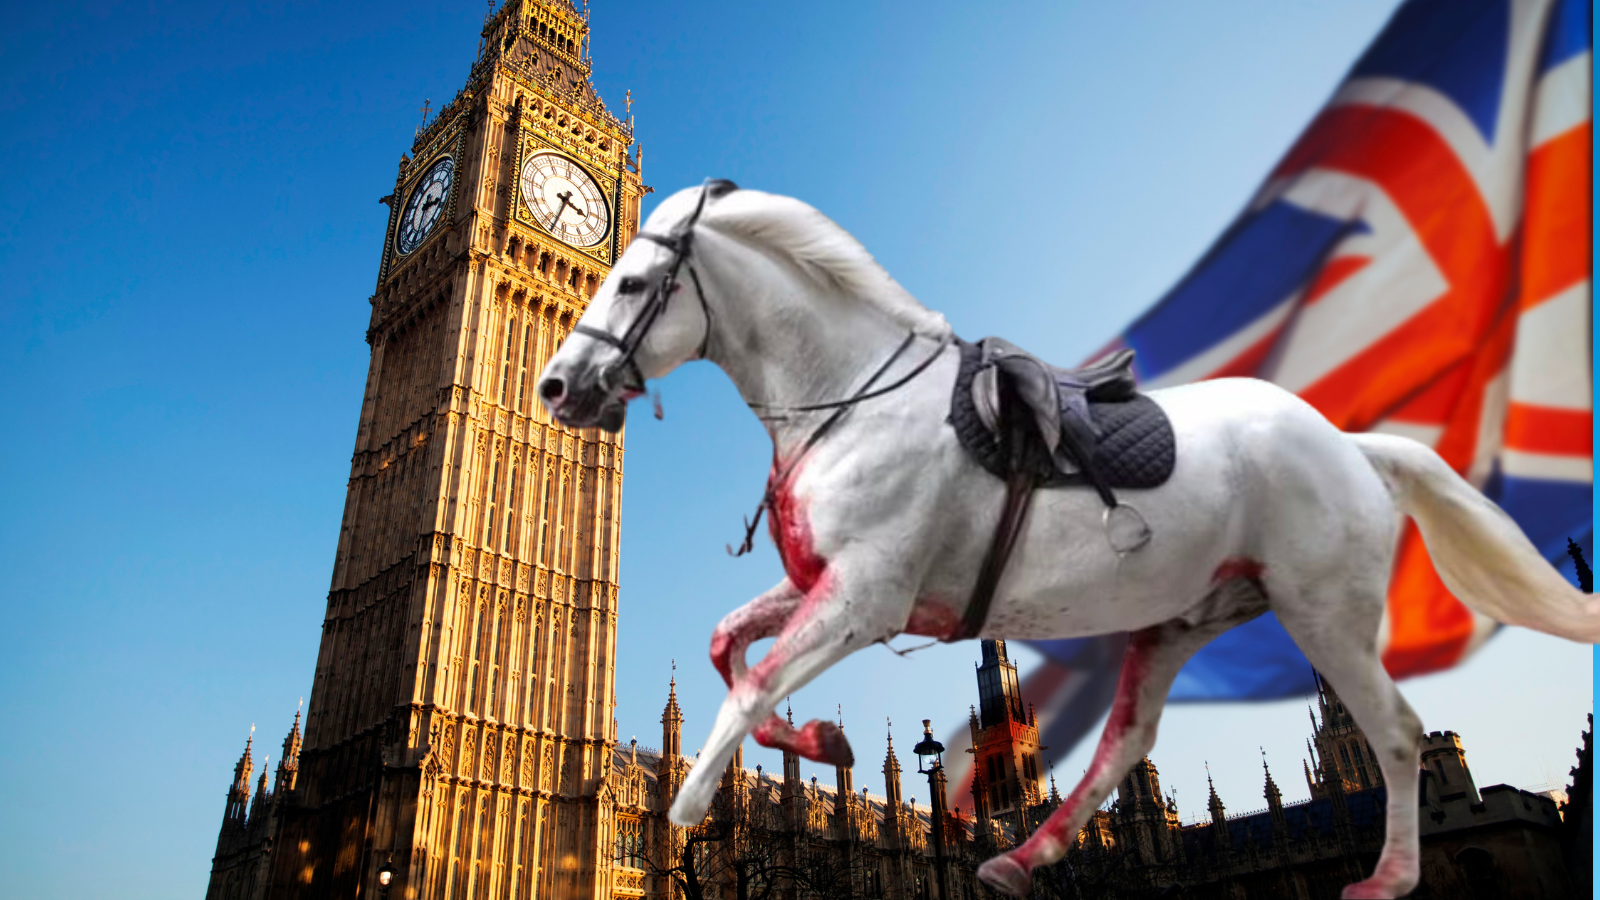 UK: Blood Red Horse and Big Ben Suddenly Stops Working